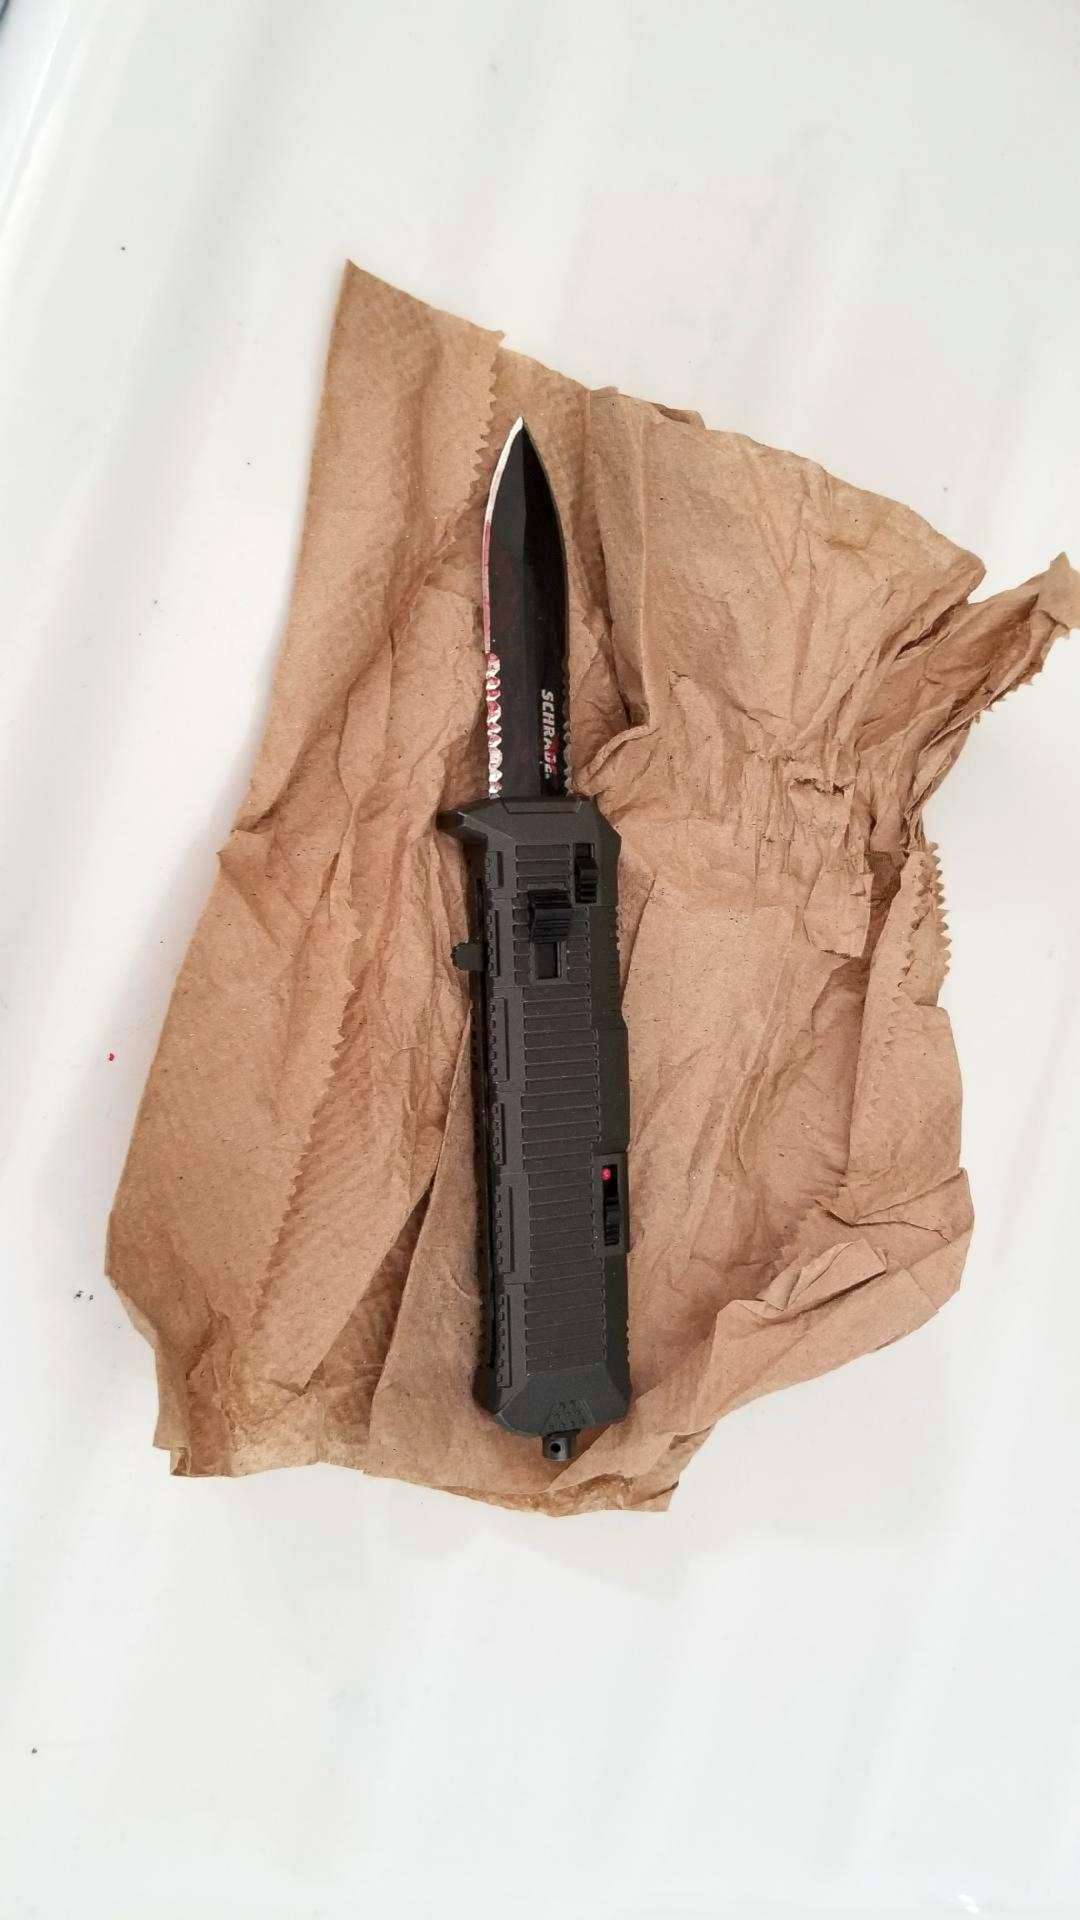 PHOTO: Knife an 18-year-old allegedly used to stab two classmates at a New York City high school, killing one, on Sept. 27, 2017.